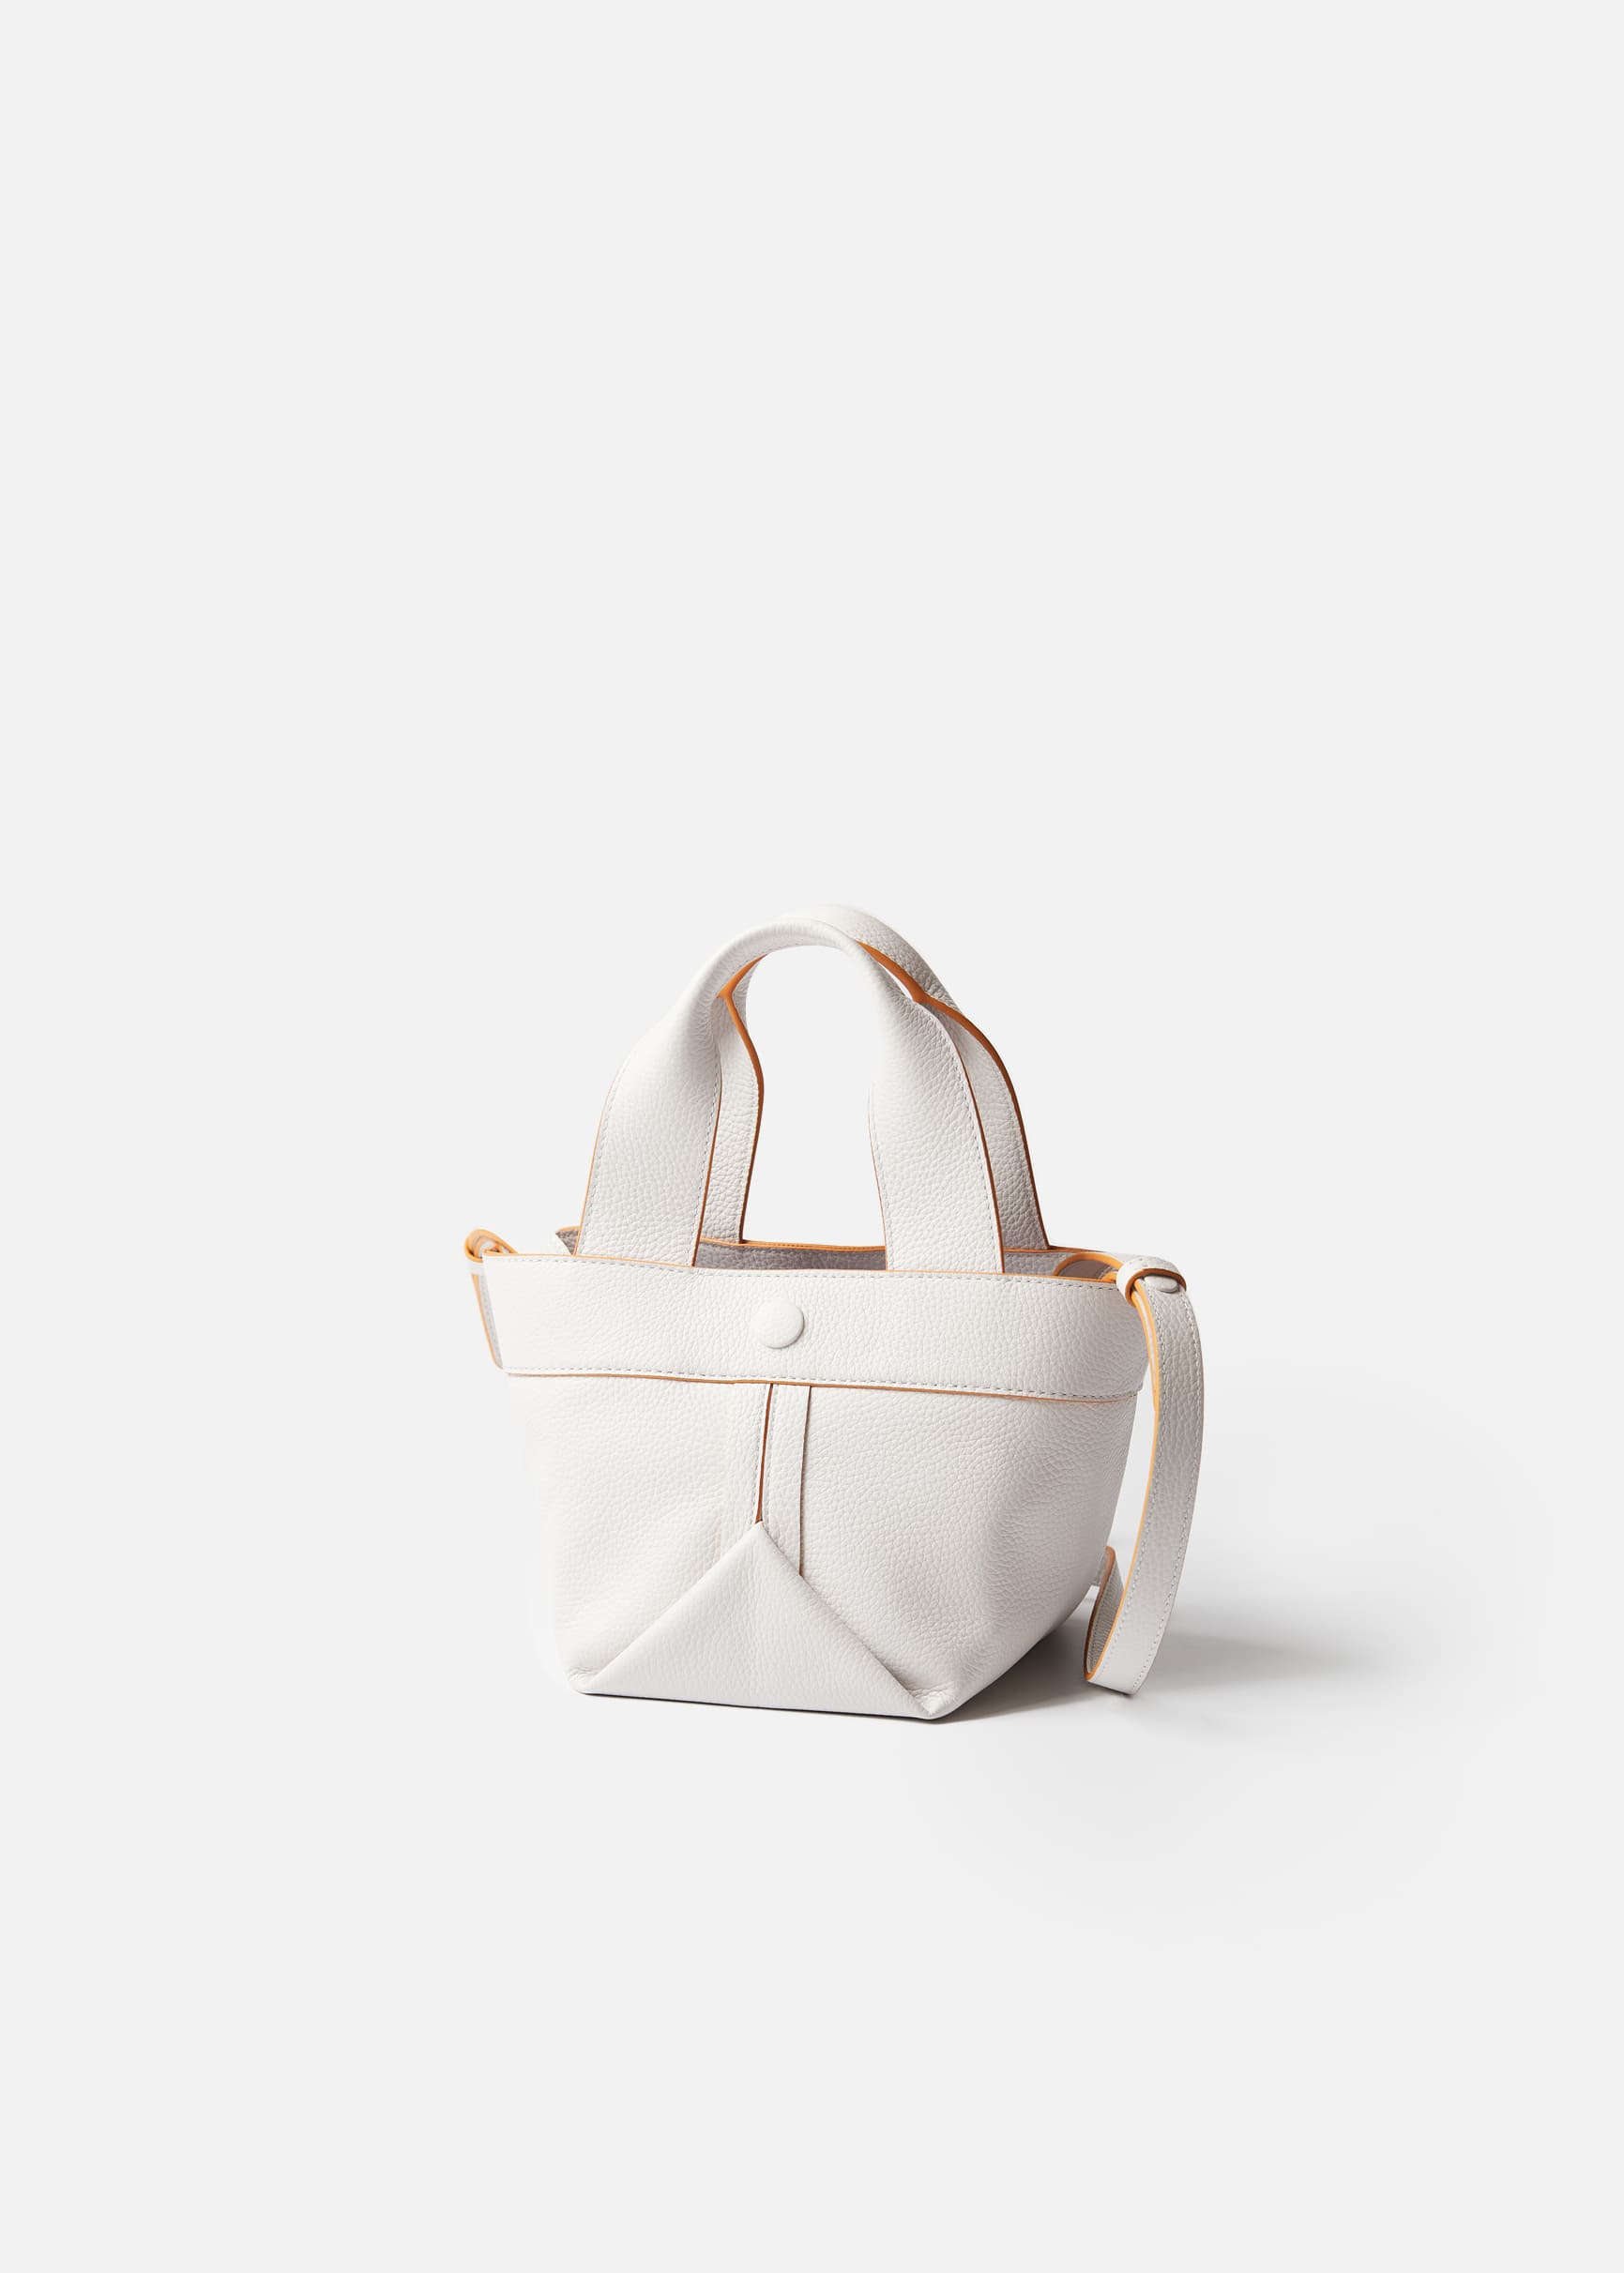 Gusset small pebble leather tote in white with caramel edge paint